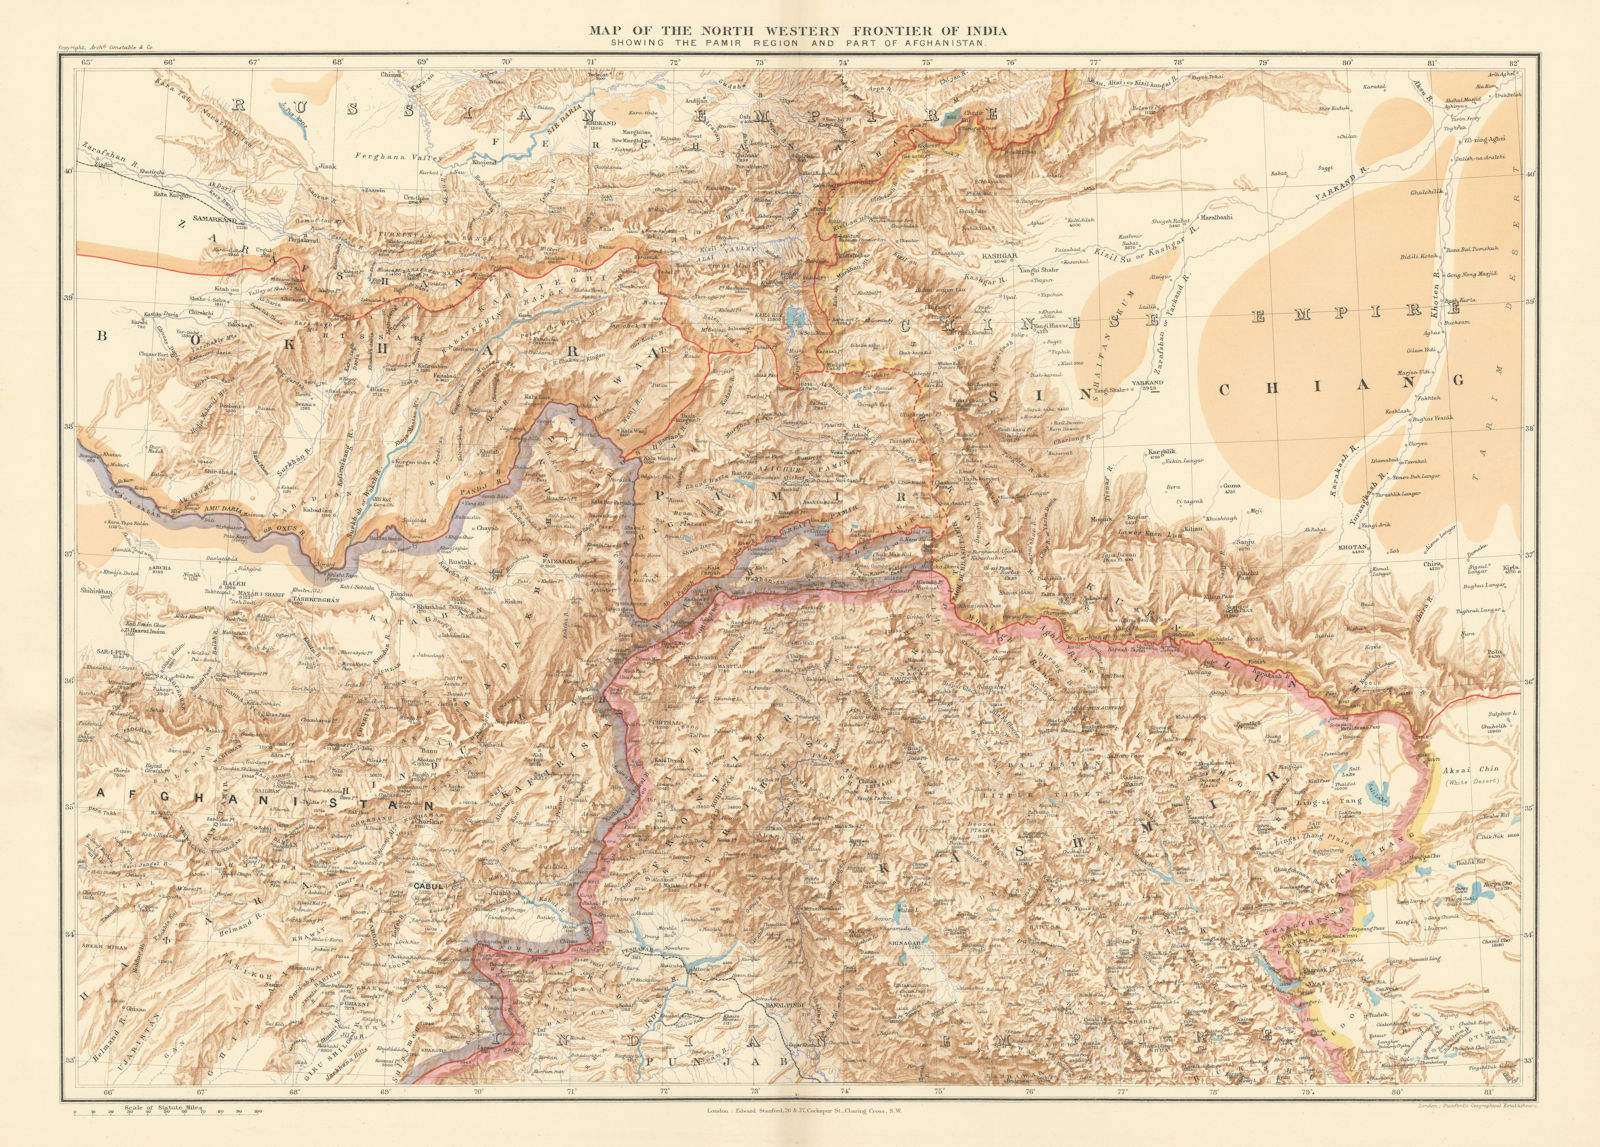 Associate Product India North Western Frontier Kashmir Pamir region Afghanistan. STANFORD 1896 map